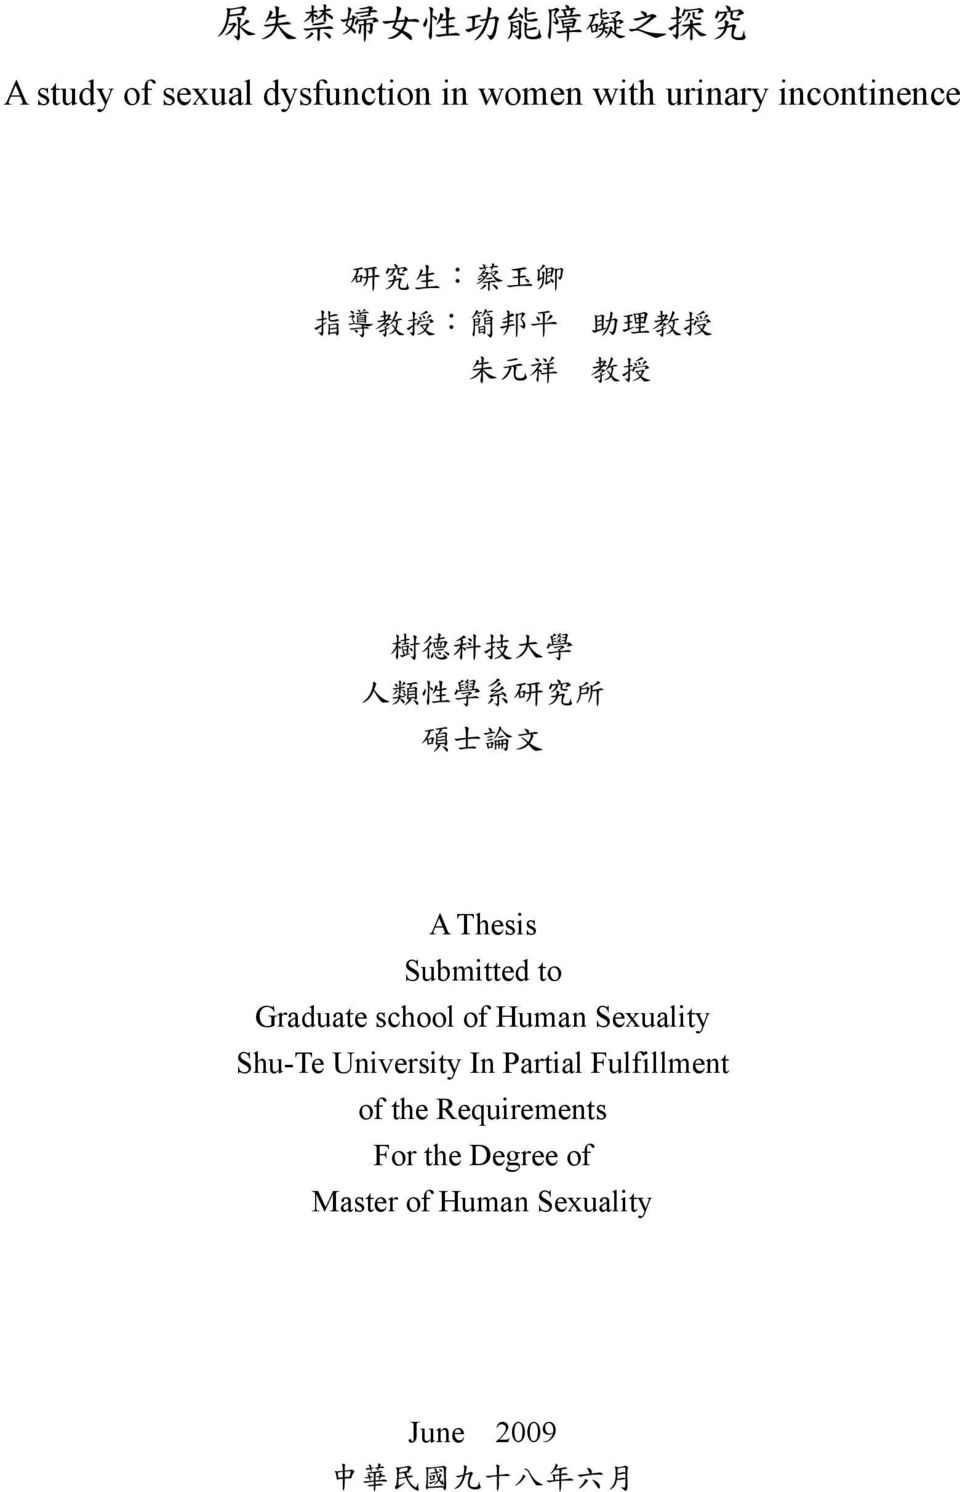 Thesis Submitted to Graduate school of Human Sexuality Shu-Te University In Partial